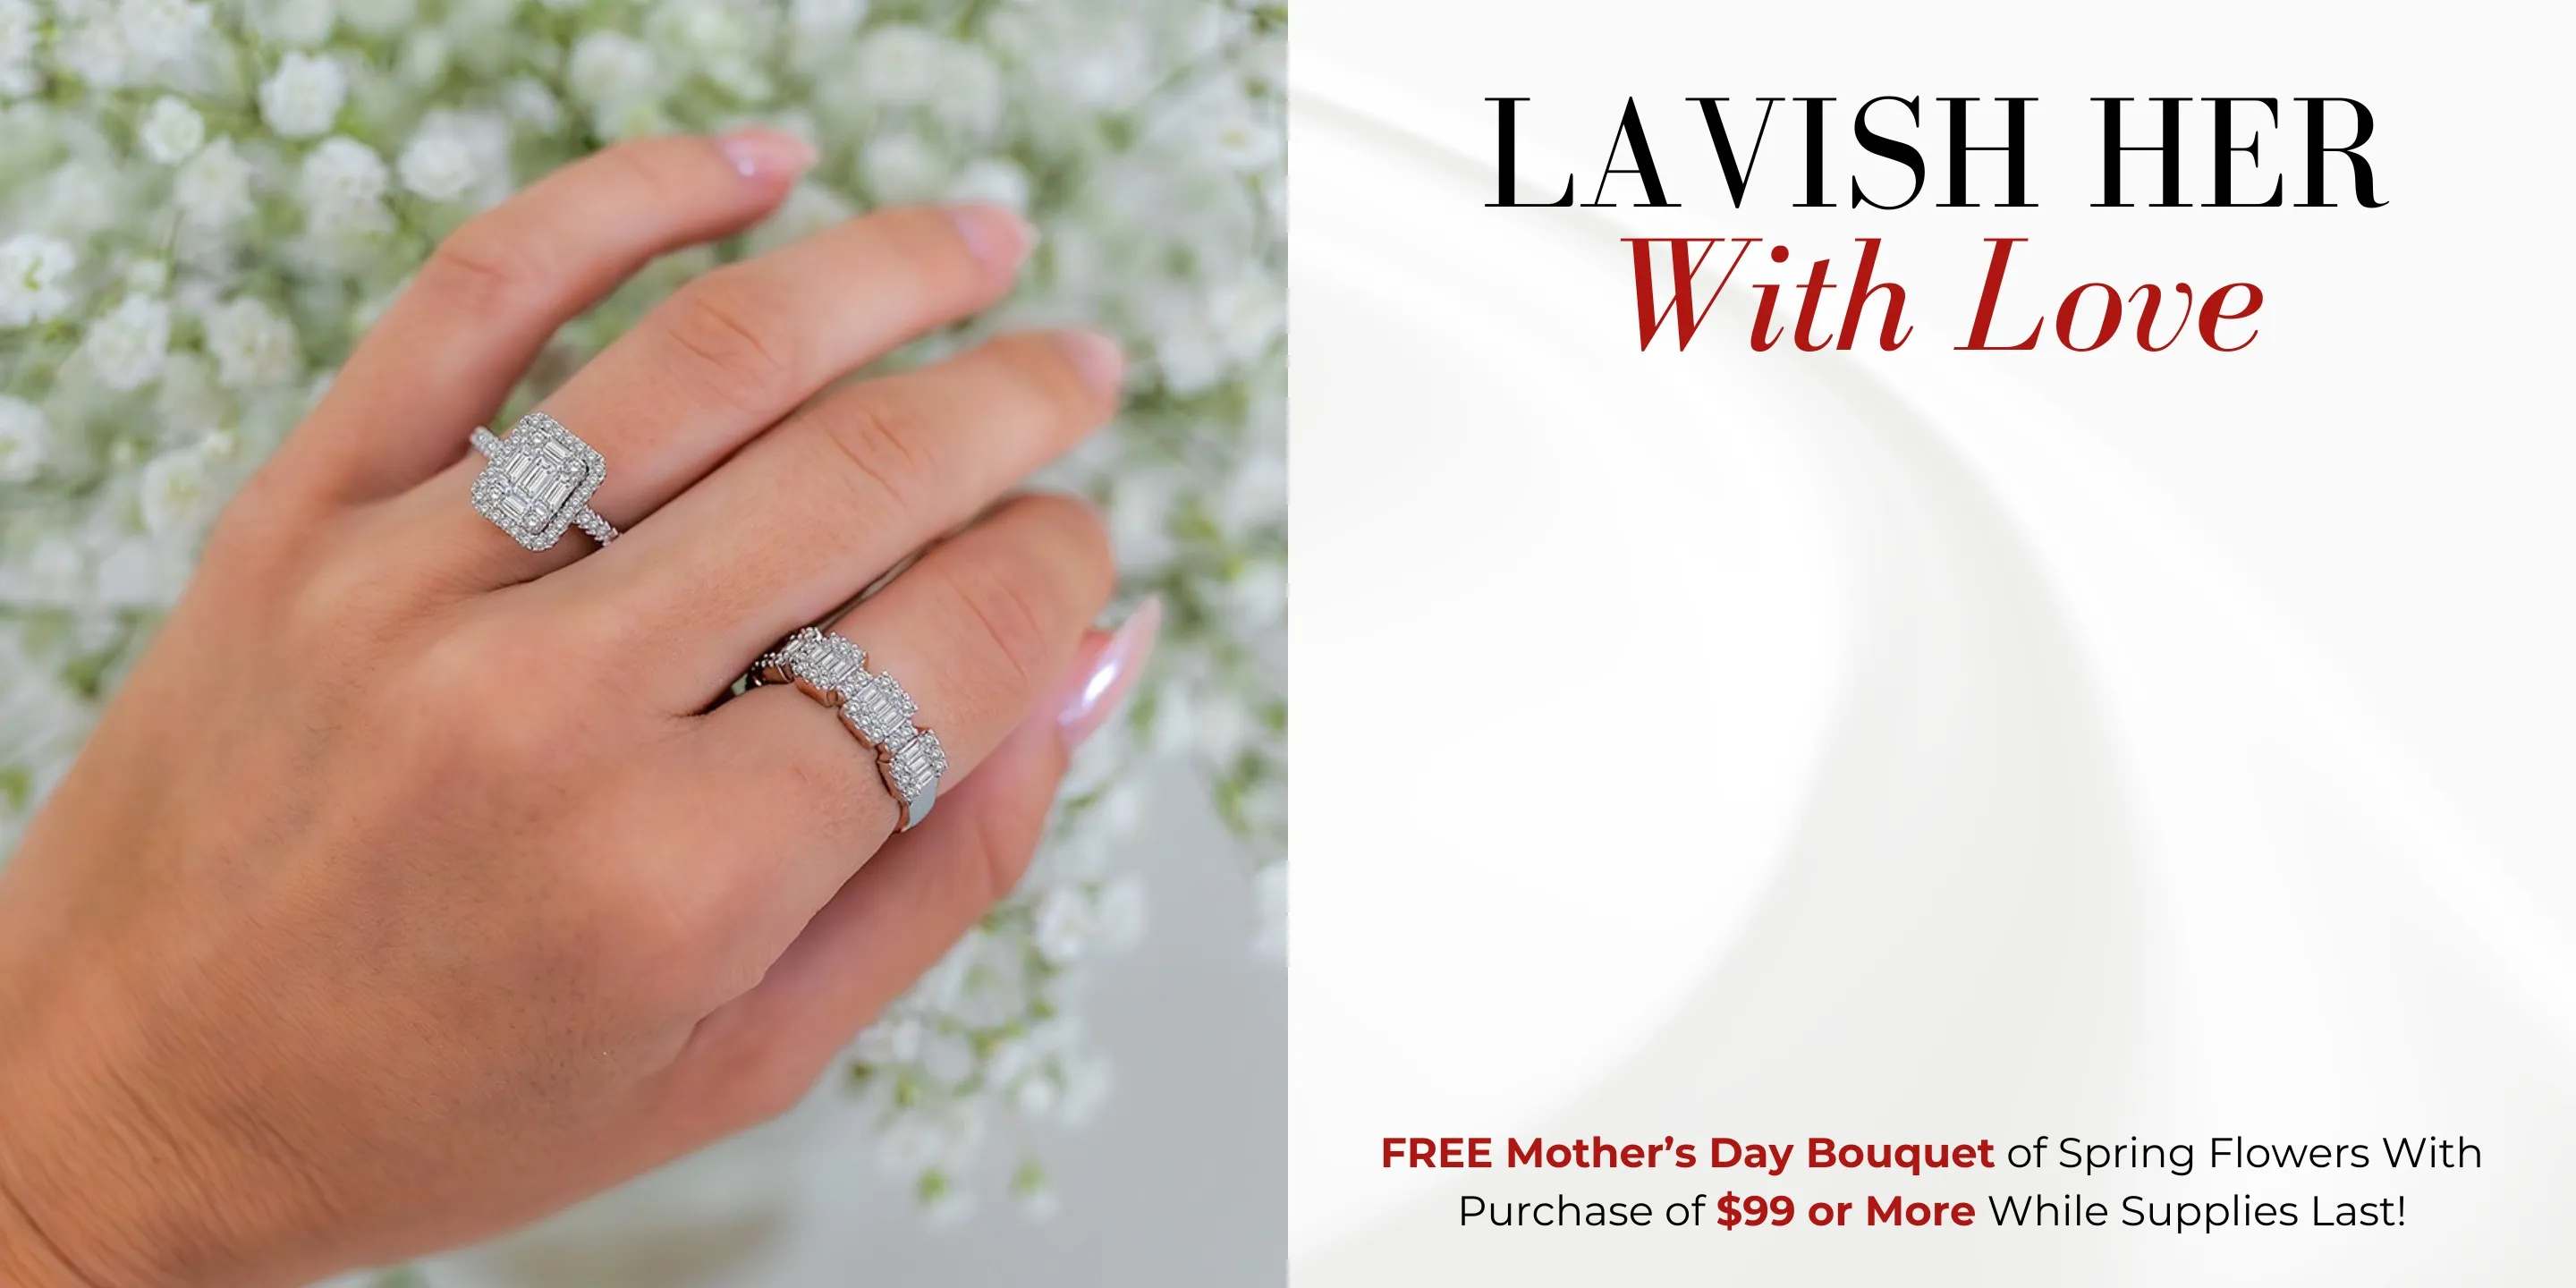 Save up to 40% off diamond engagement rings at Robert Irwin Jewelers Memphis, TN